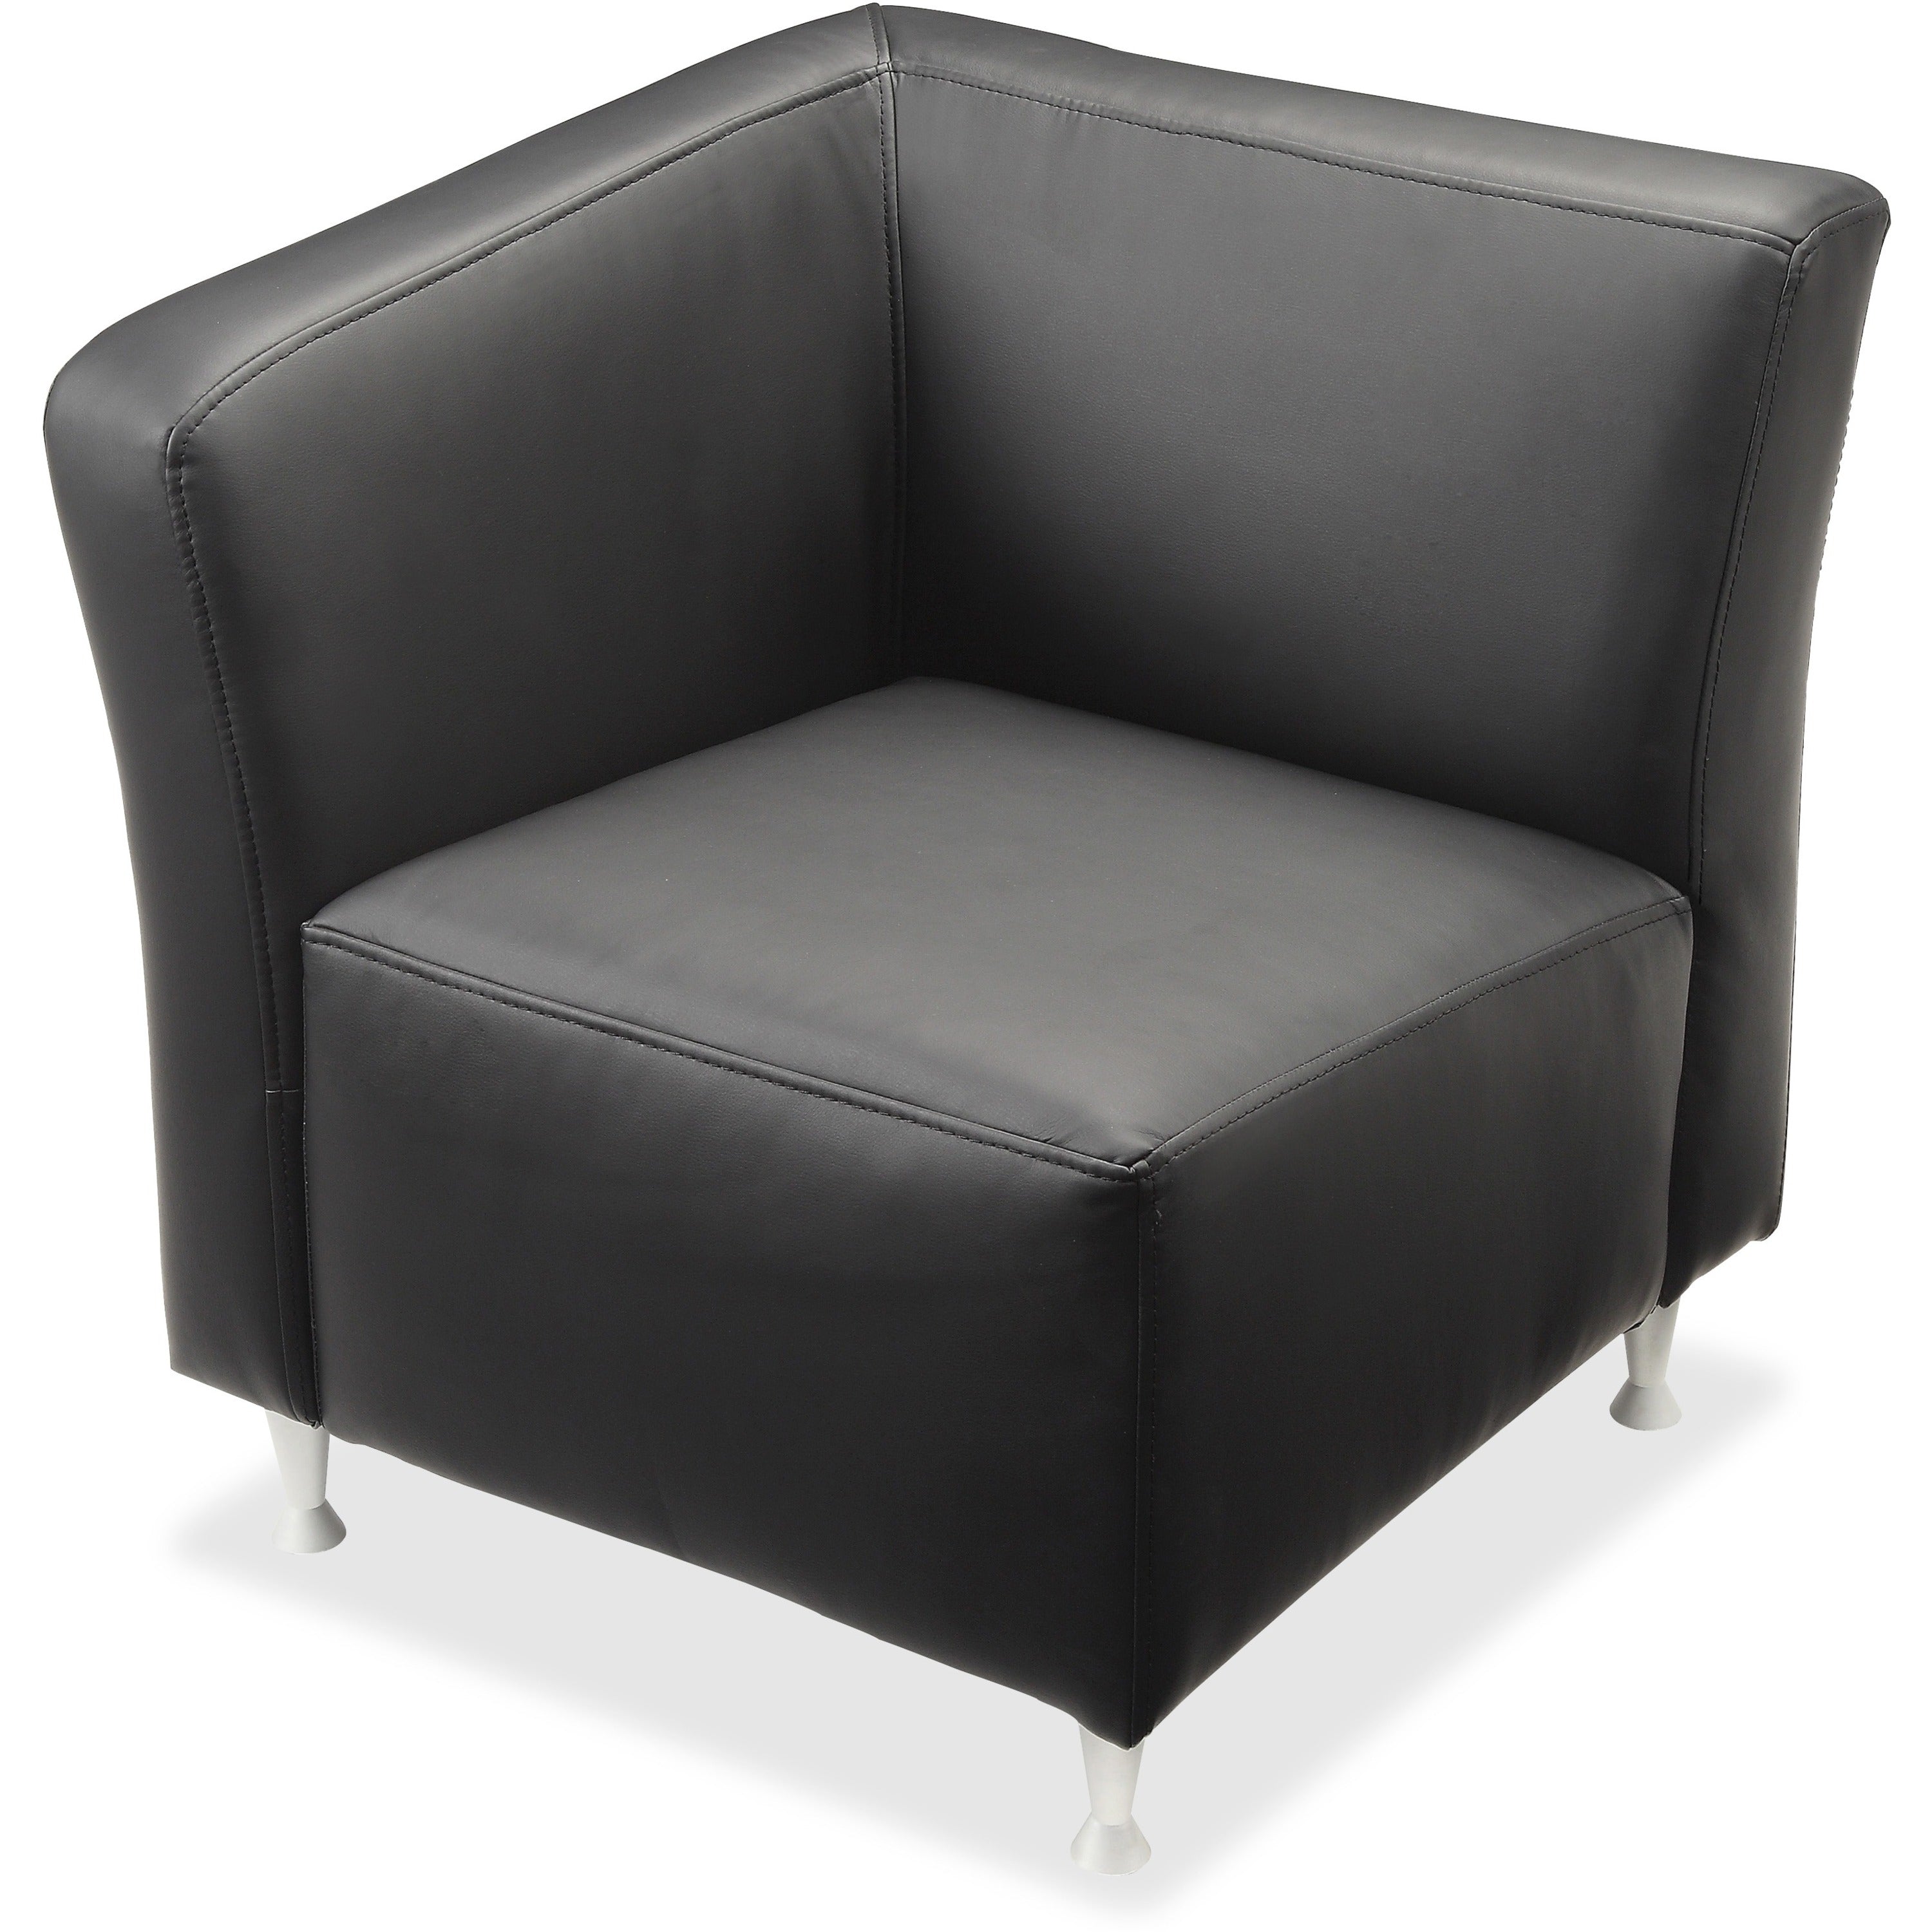 lorell-fuze-modular-series-right-lounge-chair-black-leather-seat-black-leather-back-high-back-1-each_llr86918 - 1